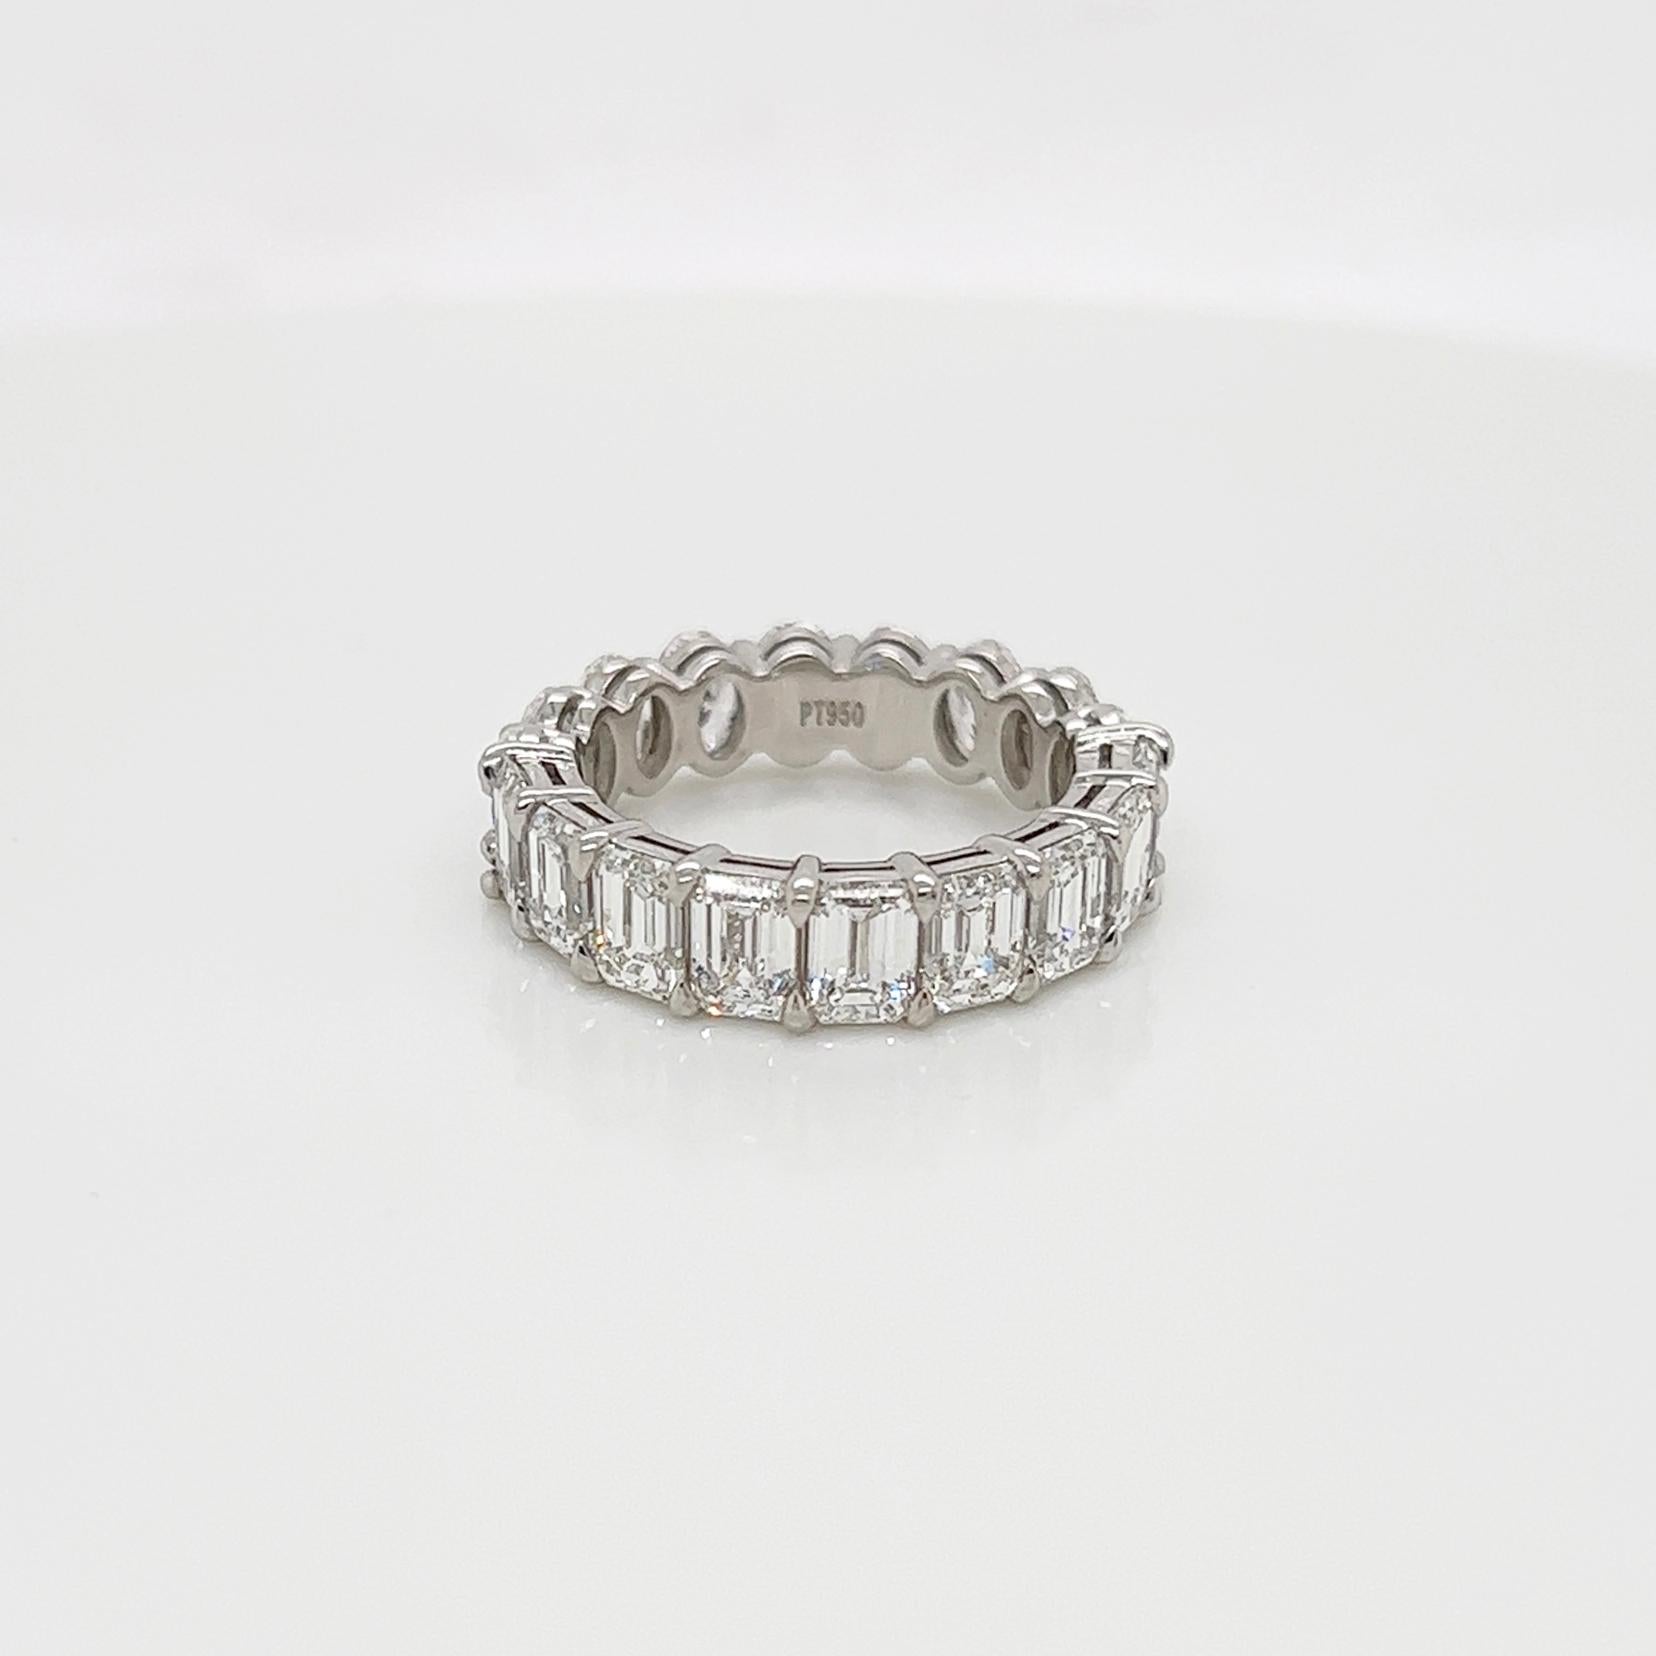 Ladies diamond mixed shape Eternity band carries 5.74 Total Carat of oval and emerald diamonds placed in platinum.

Size: 6.0
Color: G-H
Clarity: VS

This shared prong style Eternity band was handmade by our jewelers in New York City.